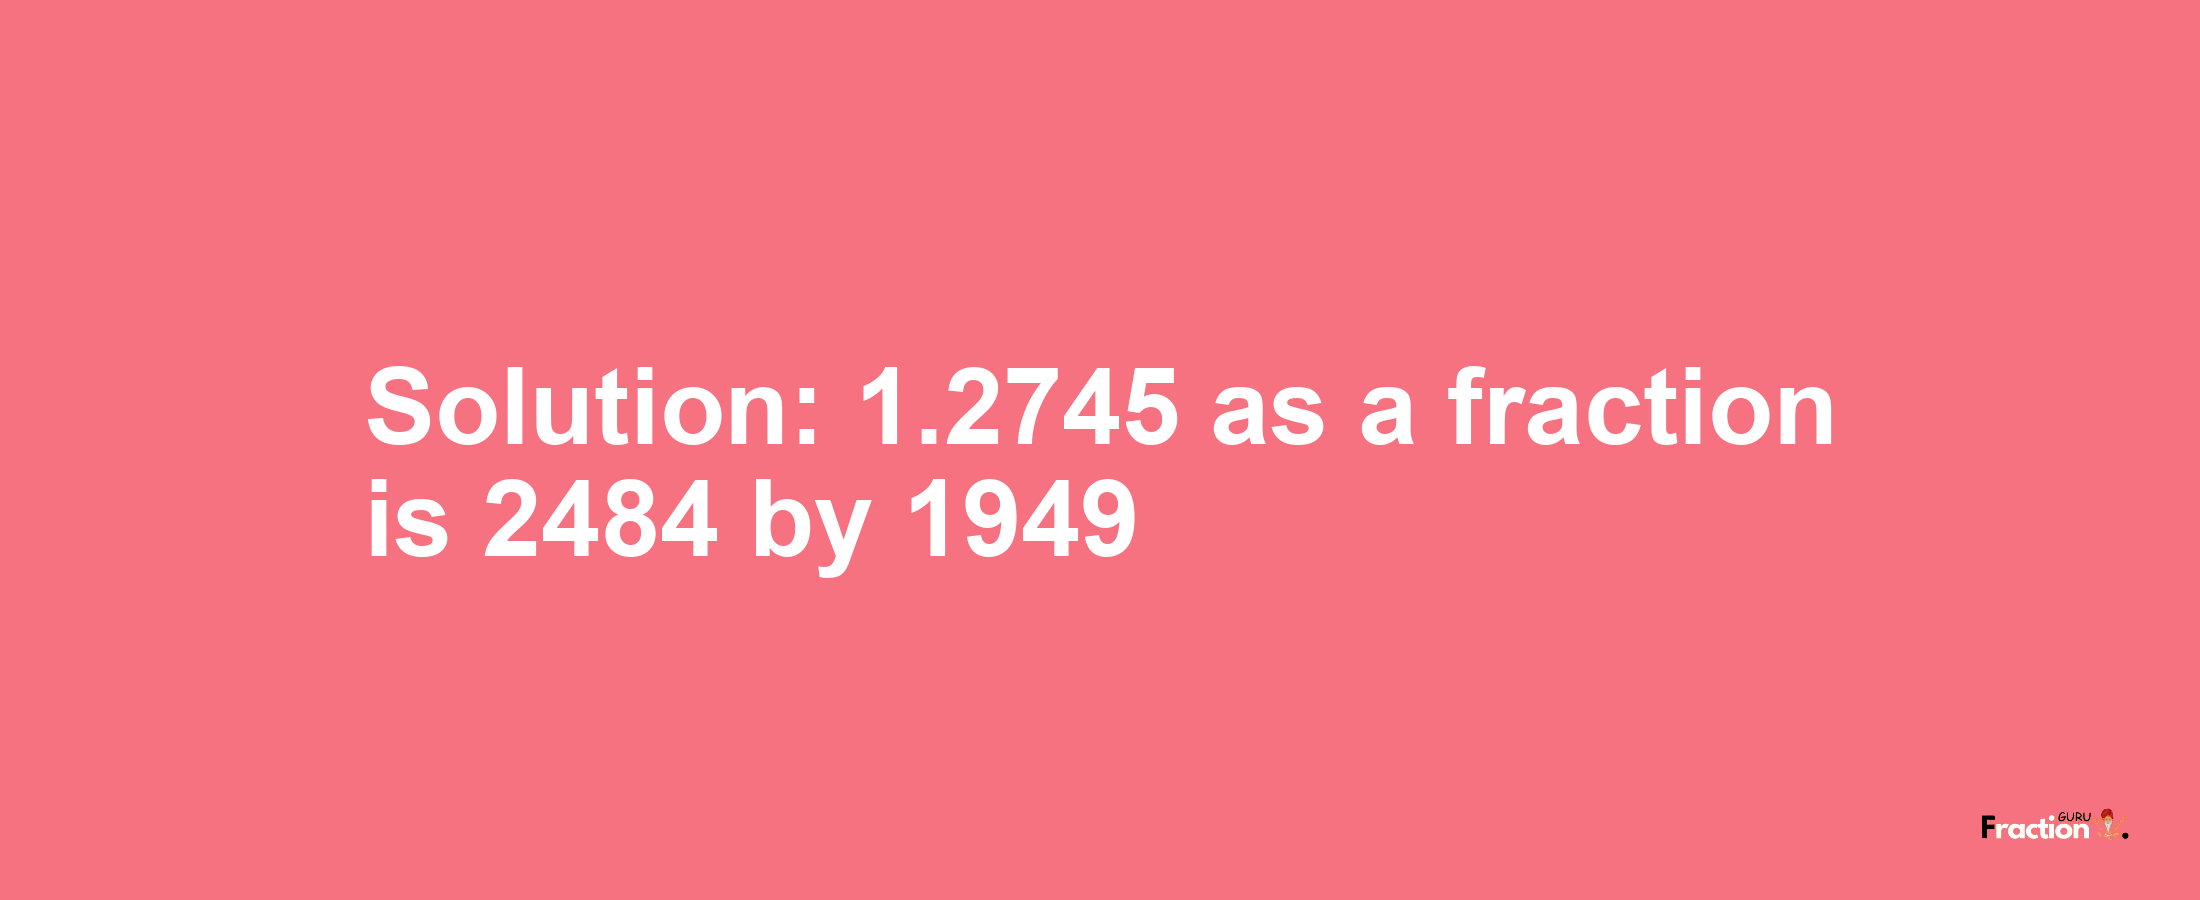 Solution:1.2745 as a fraction is 2484/1949